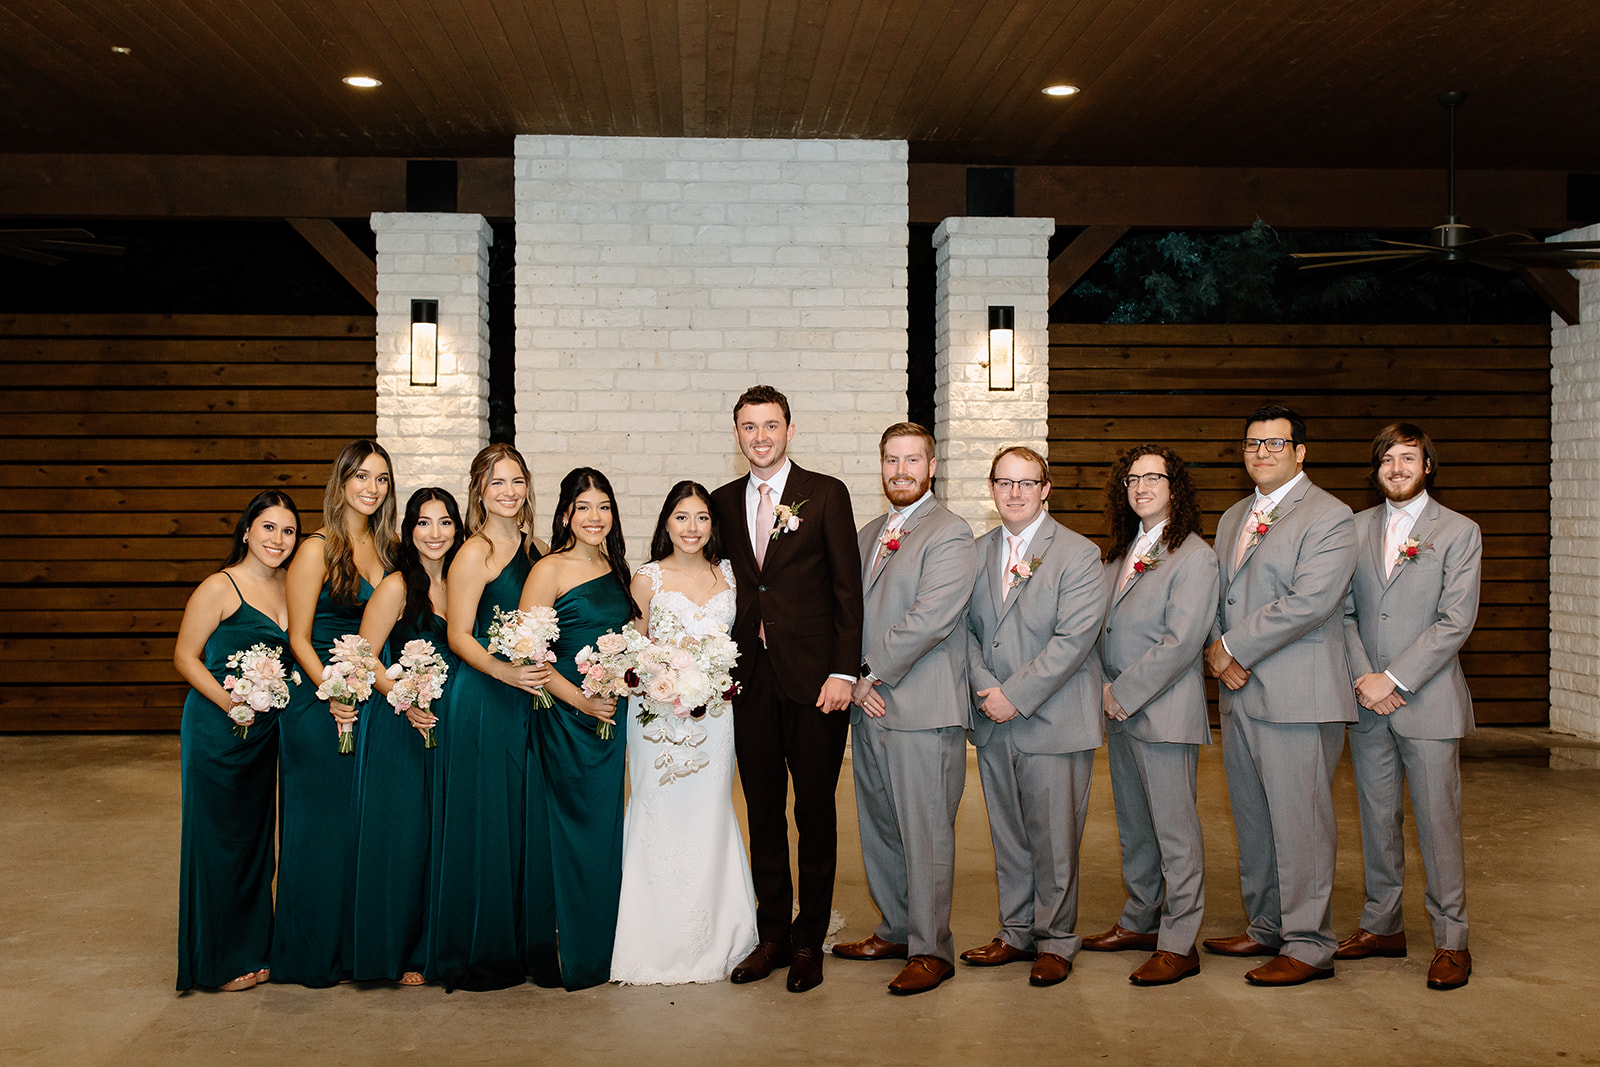 Bride and groom with wedding party